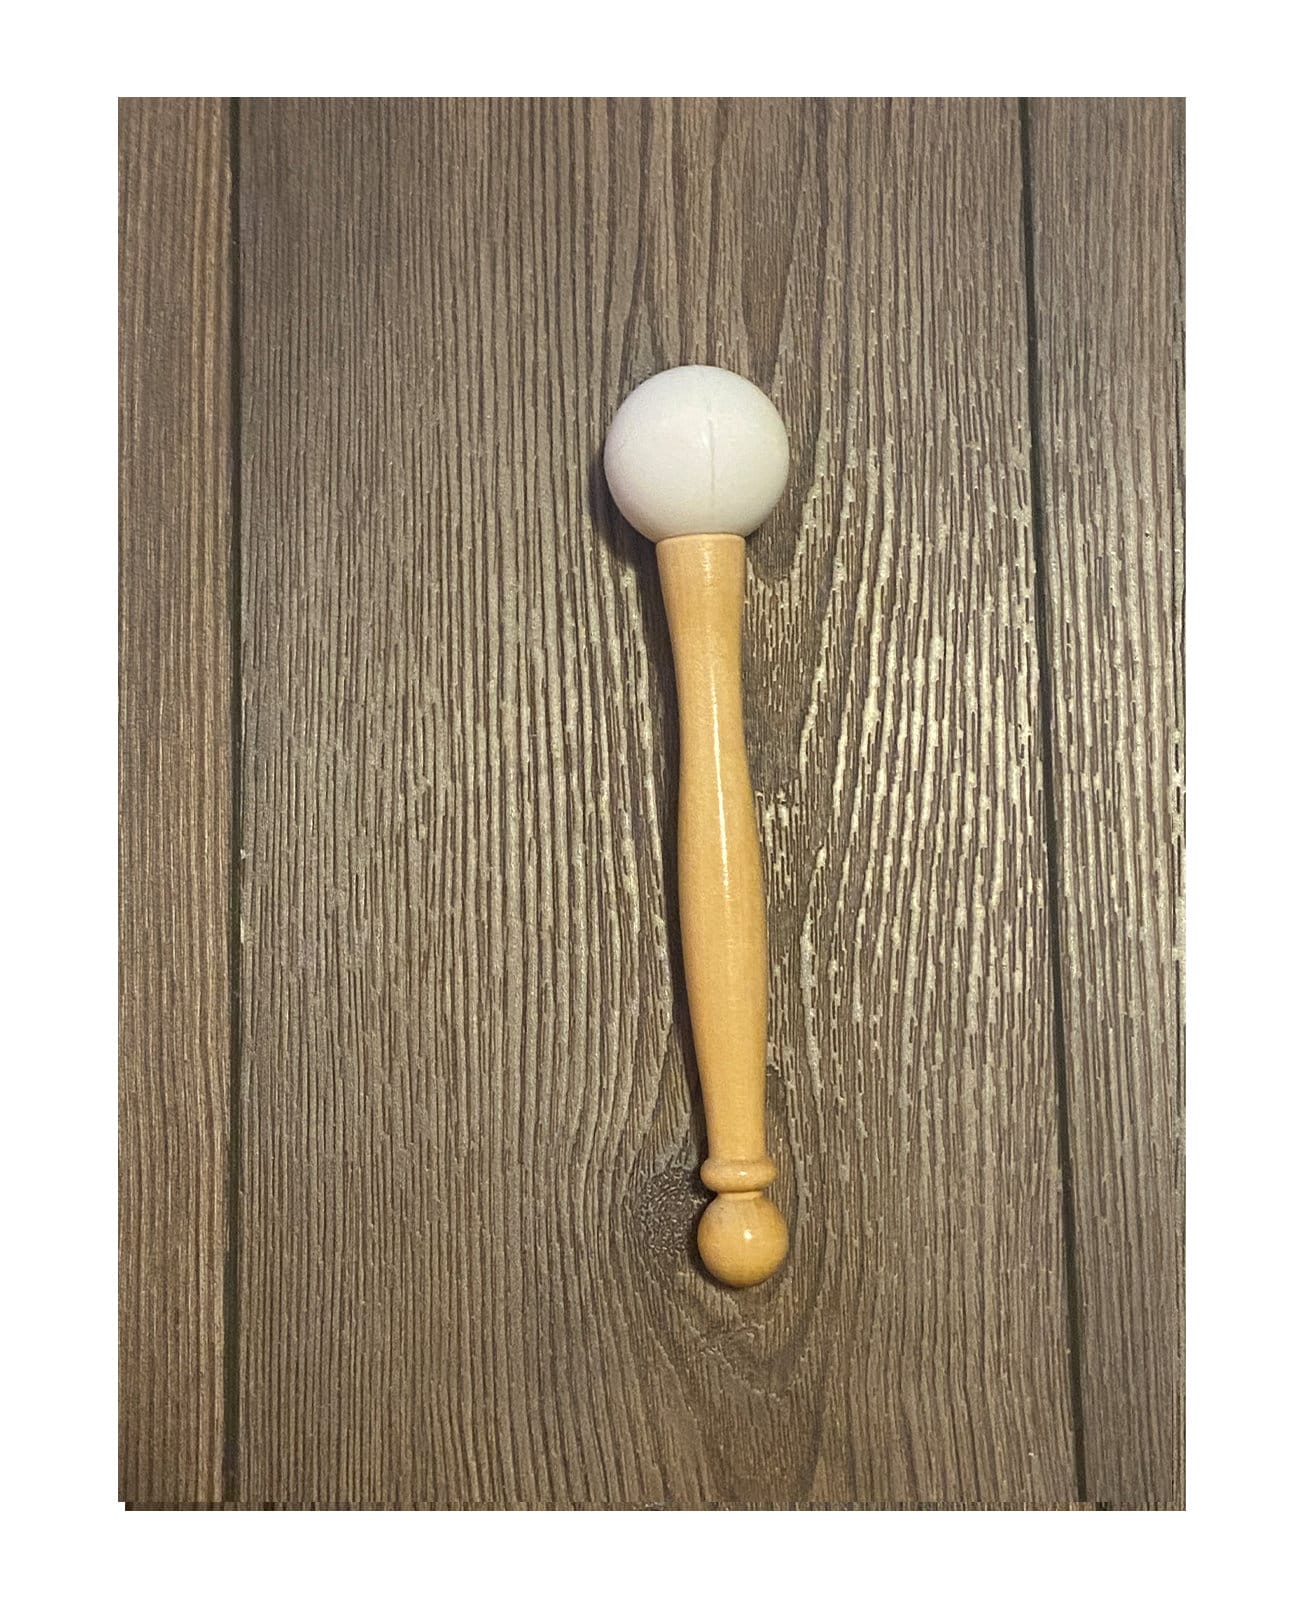 Best Precision Large Gray Yarn Mallet - Best Singing Bowls